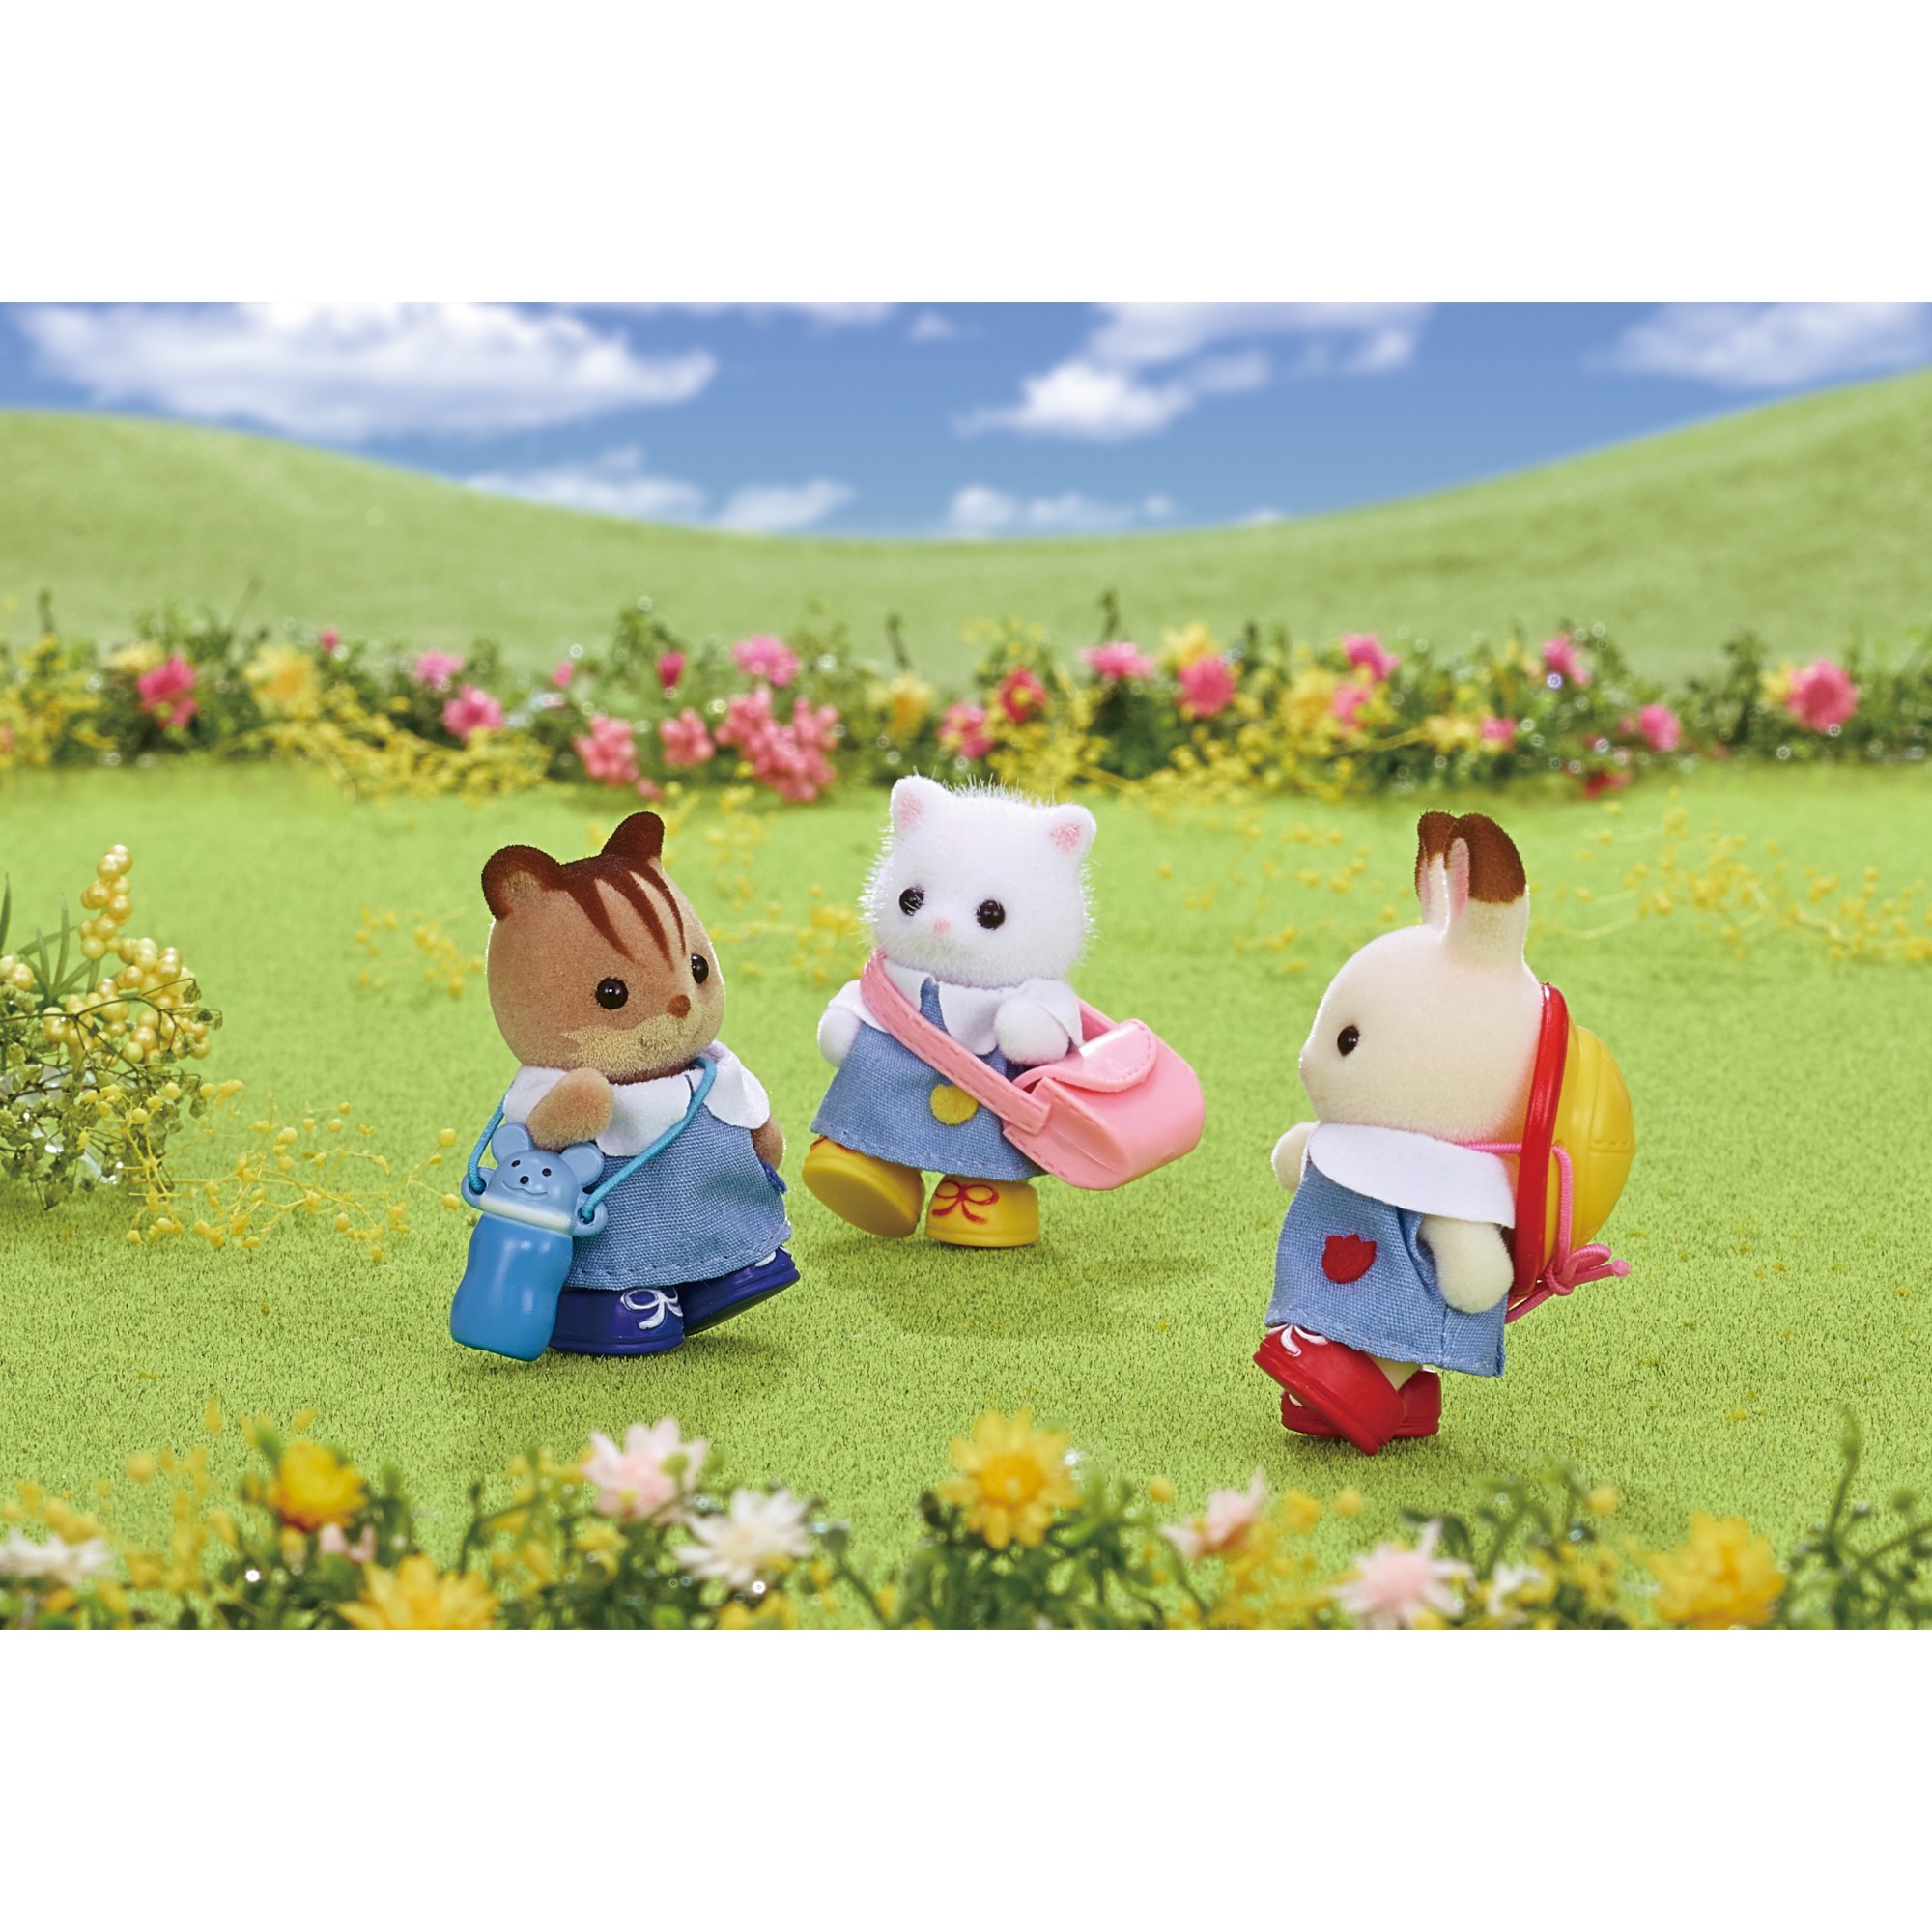 Calico Critters Nursery Friends, Set of 3 Collectible Doll Figures in Nursery School Outfits - image 4 of 4